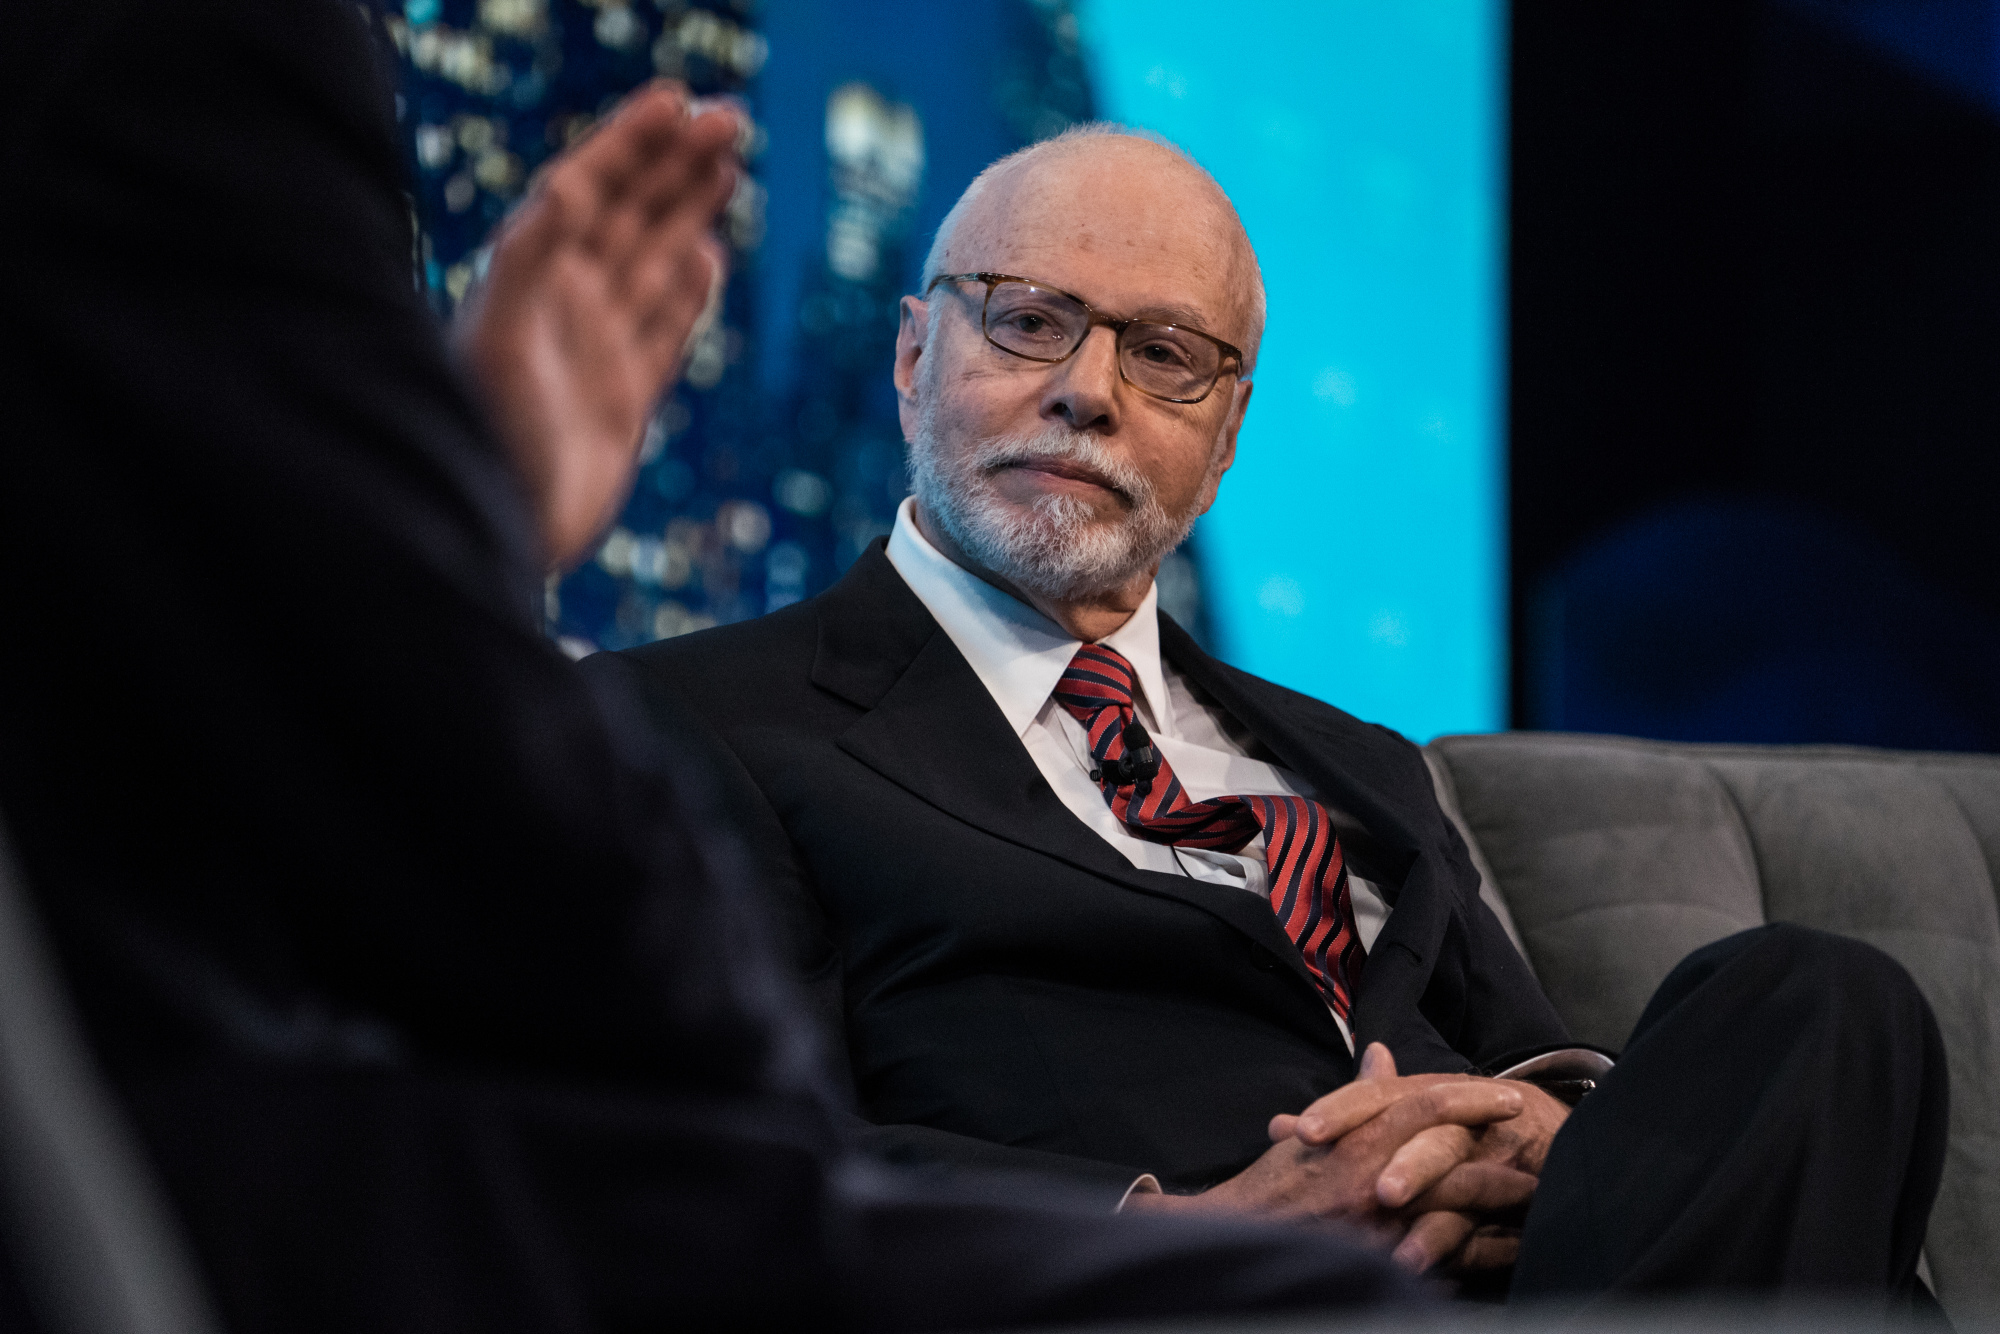 Paul Singer listens during the Bloomberg Invest Summit in New York.